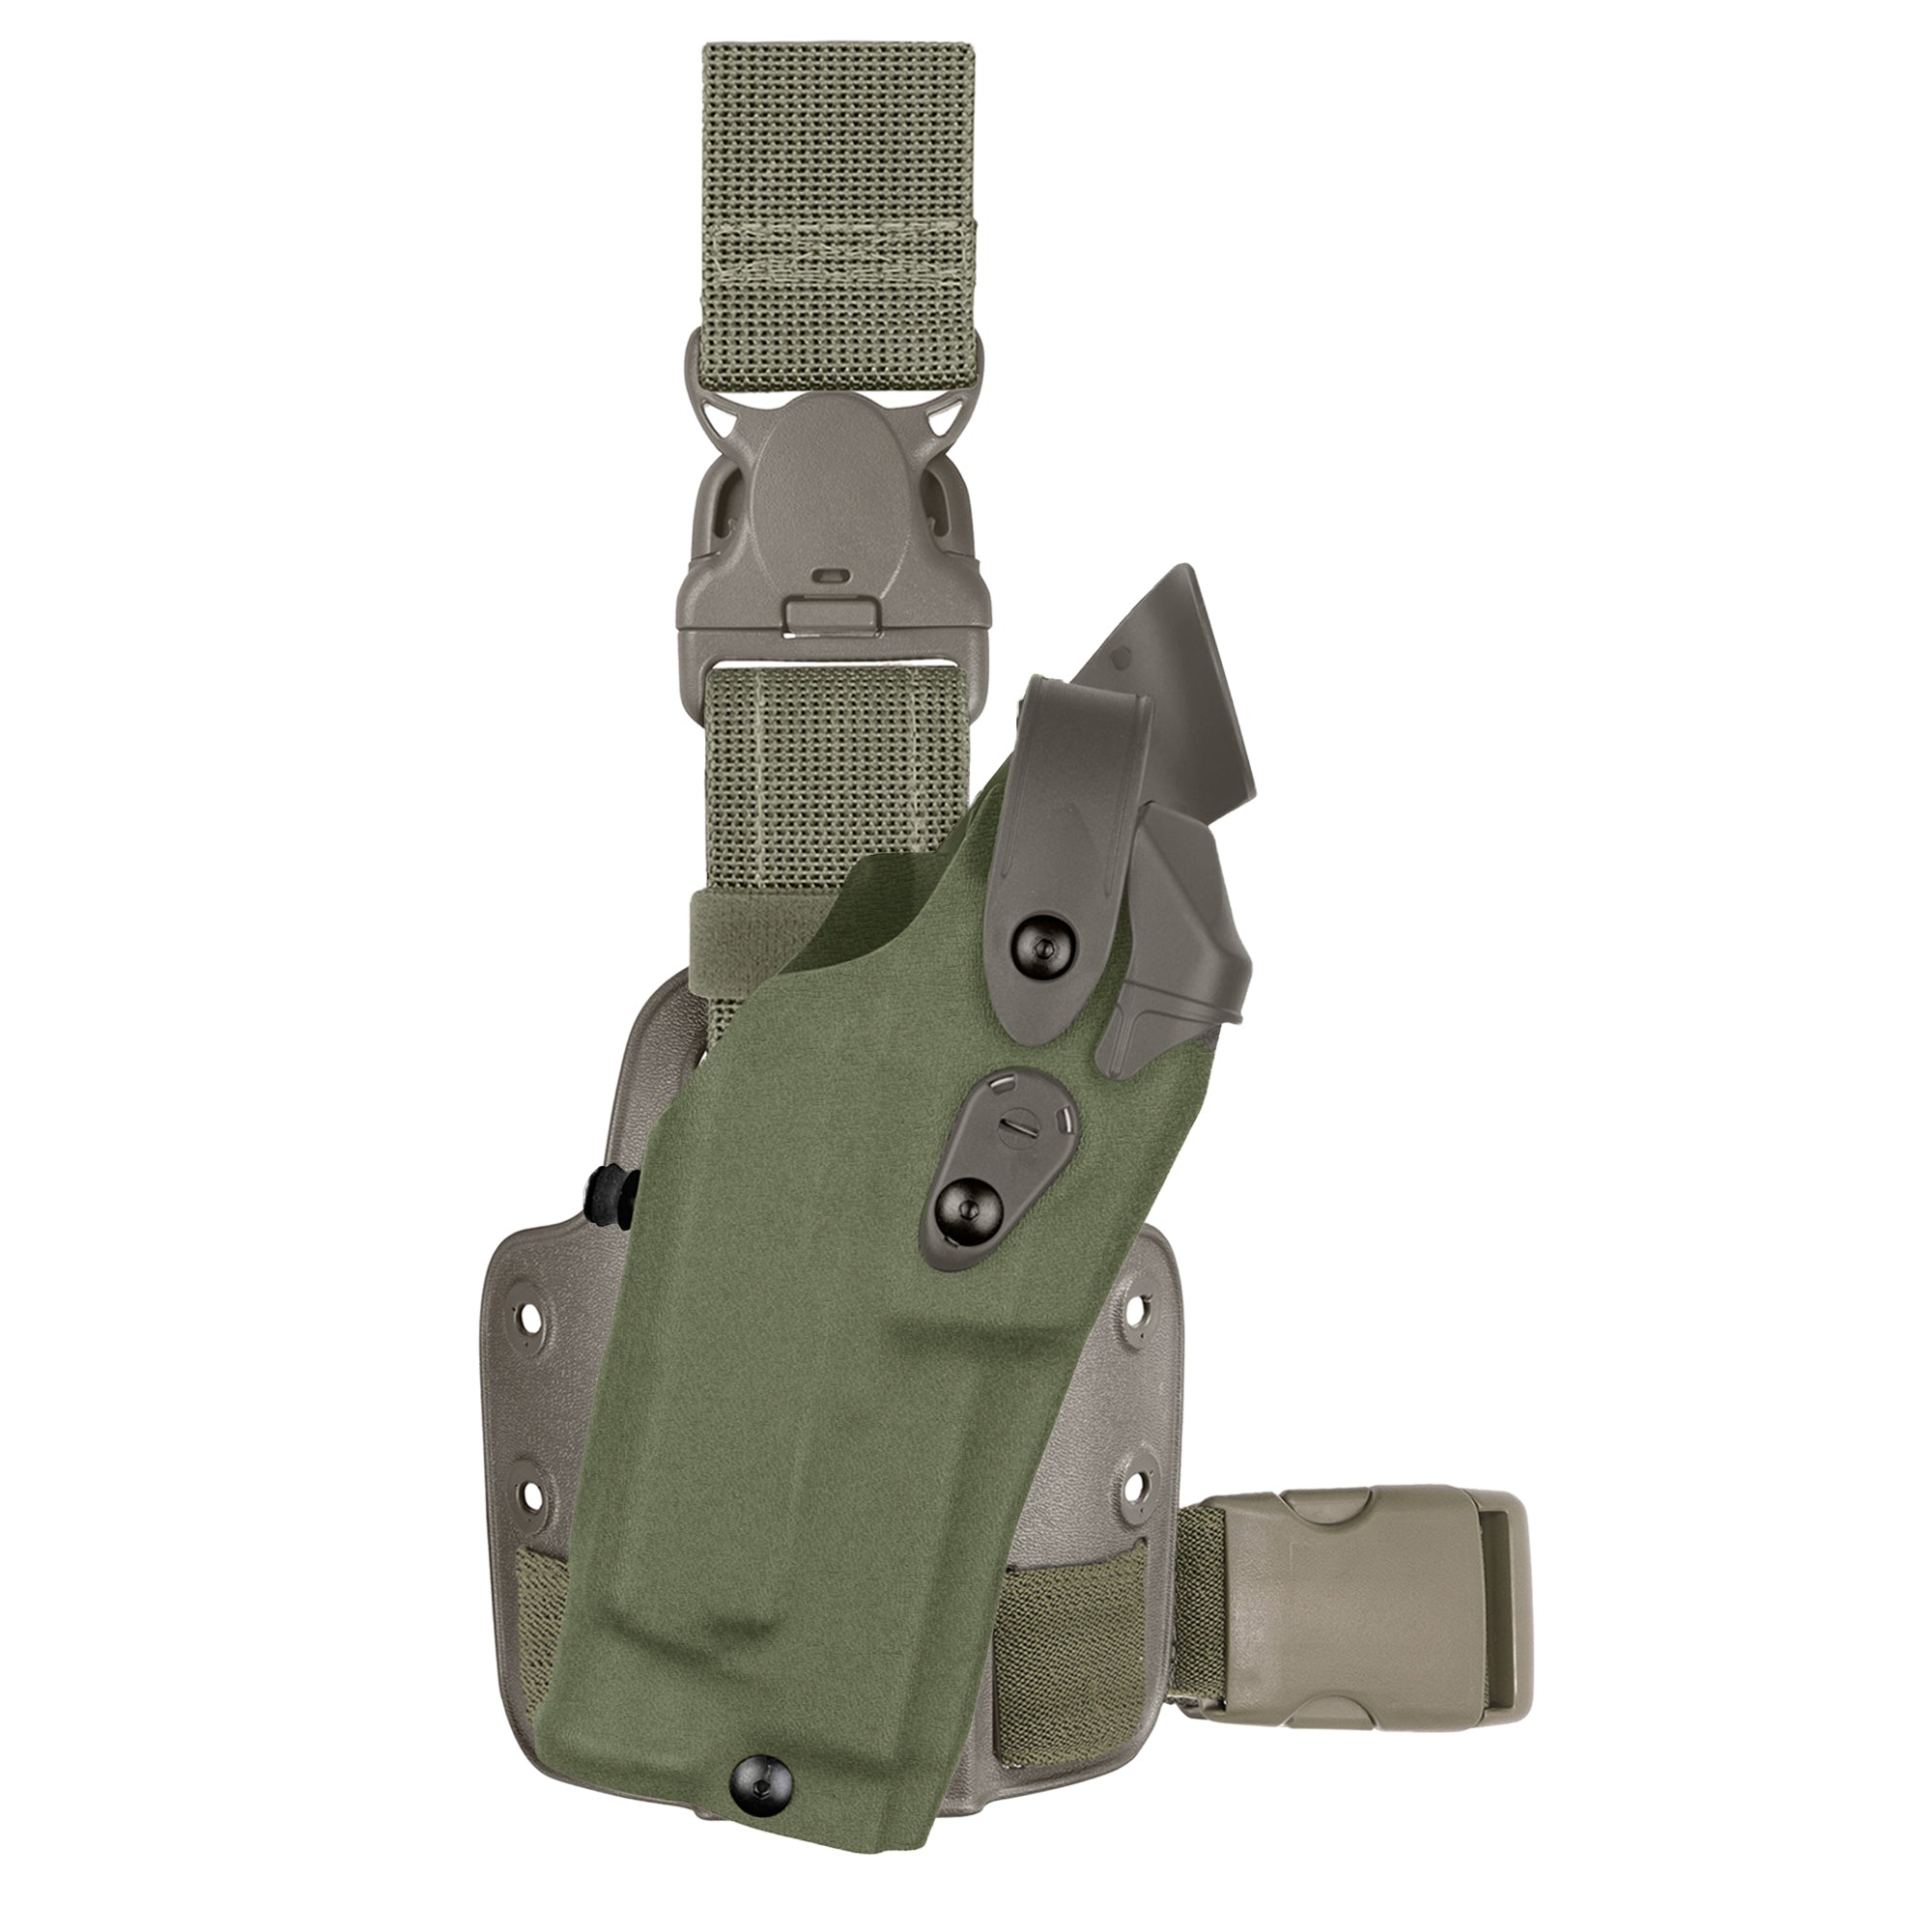 Model 6305 ALS/SLS Tactical Holster w/ Quick-Release Leg Strap for Glock 17  w/ Light/Pressure Switch